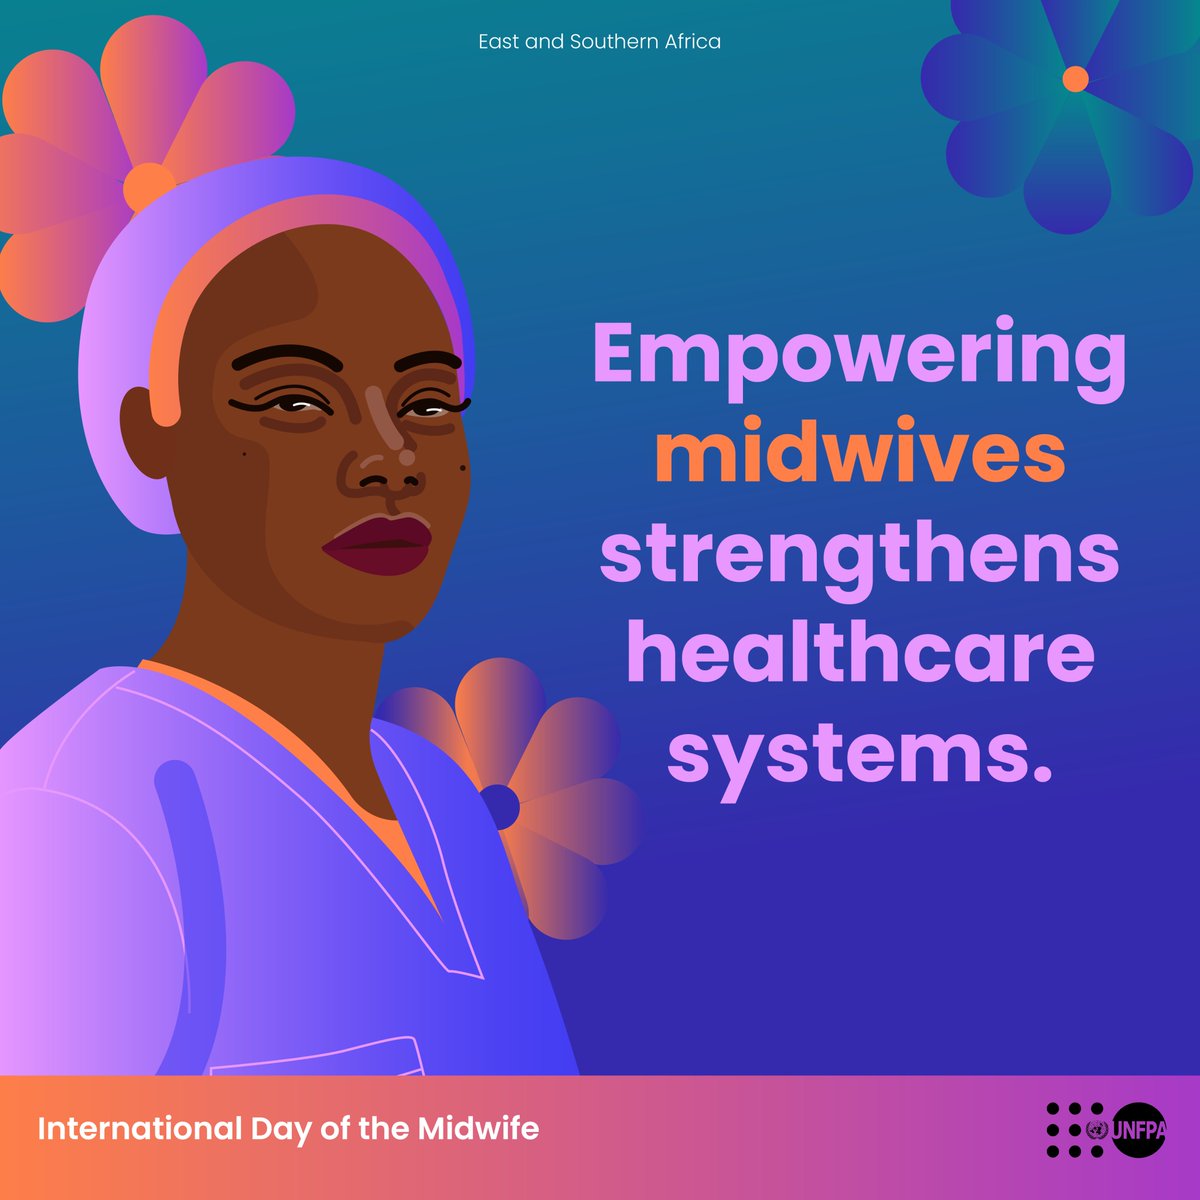 It's time to advocate for policies that support our midwives! Let's ensure they have the regulations and resources they need to thrive. #SupportMidwives #RegulateHealthcare #InvestInMidwives #DayOfTheMidwife